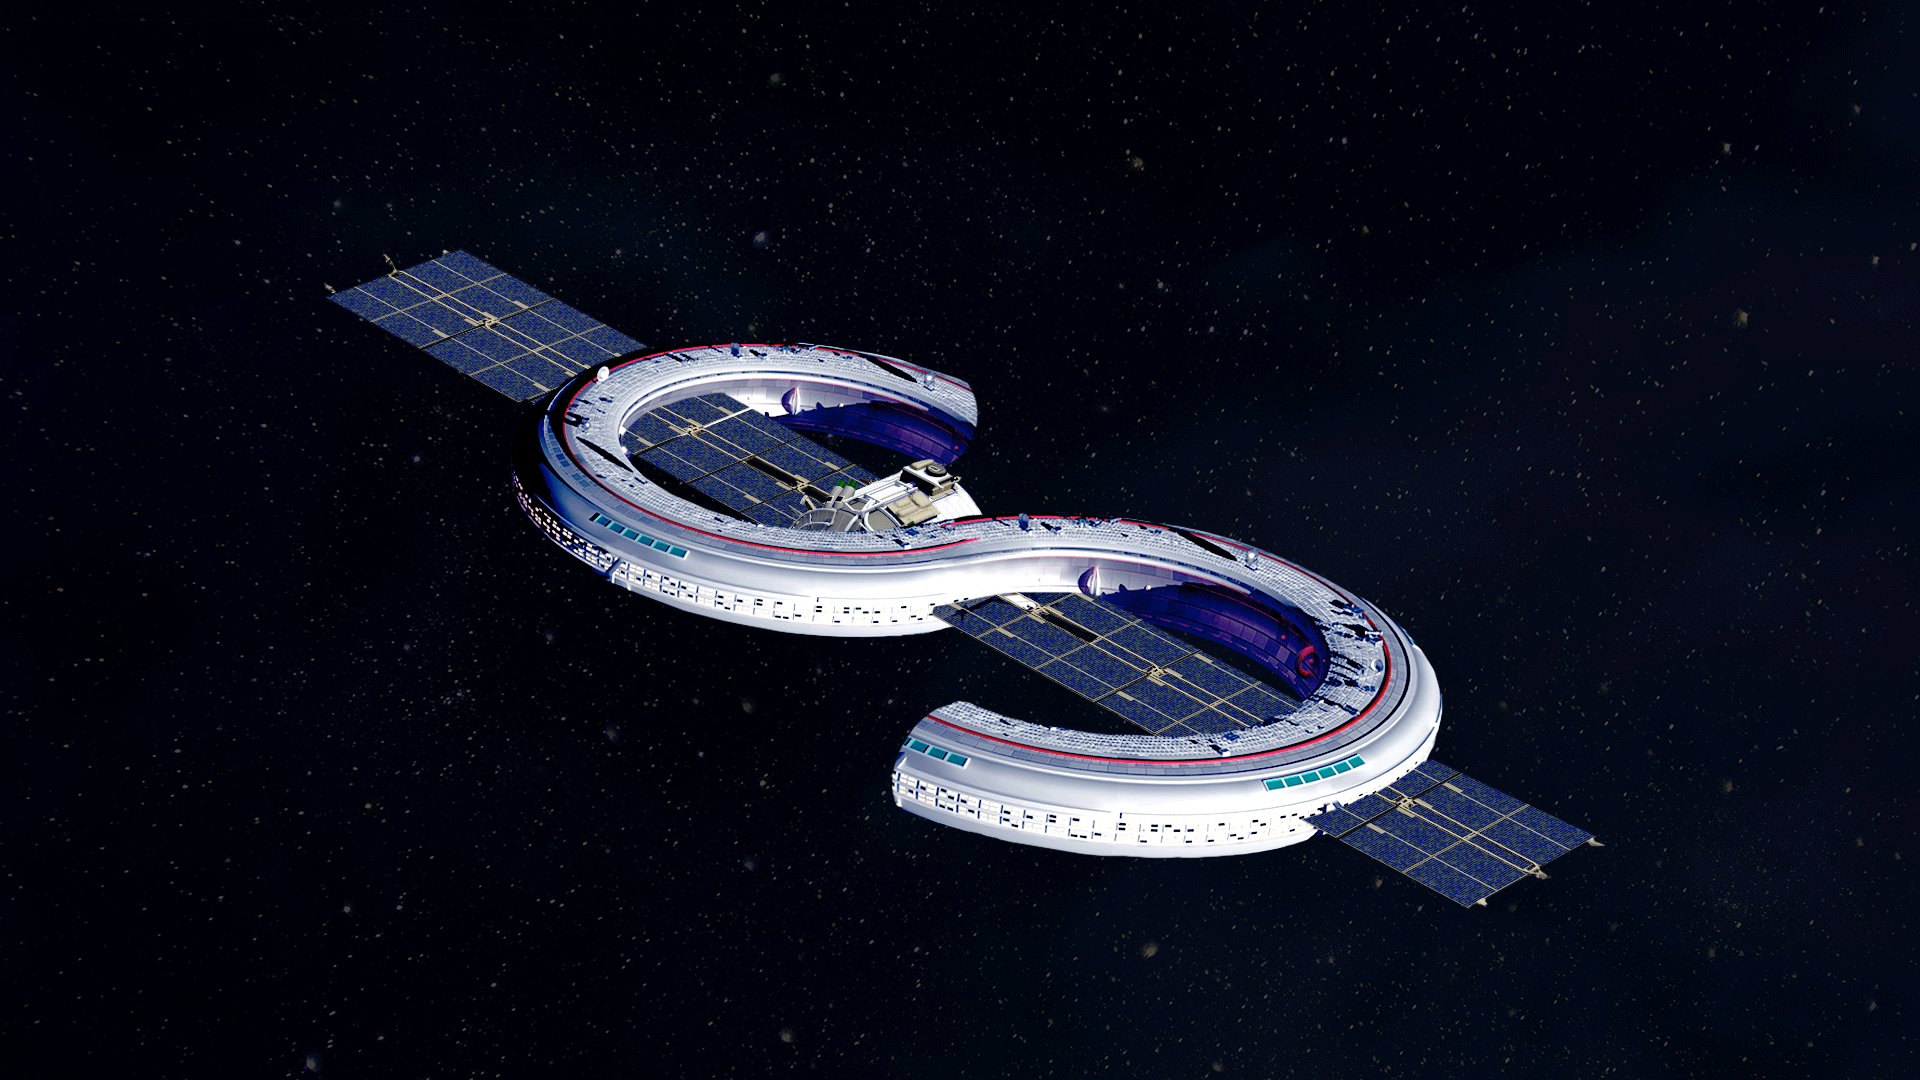 Illustration of a space station in the shape of a dollar bill sign.